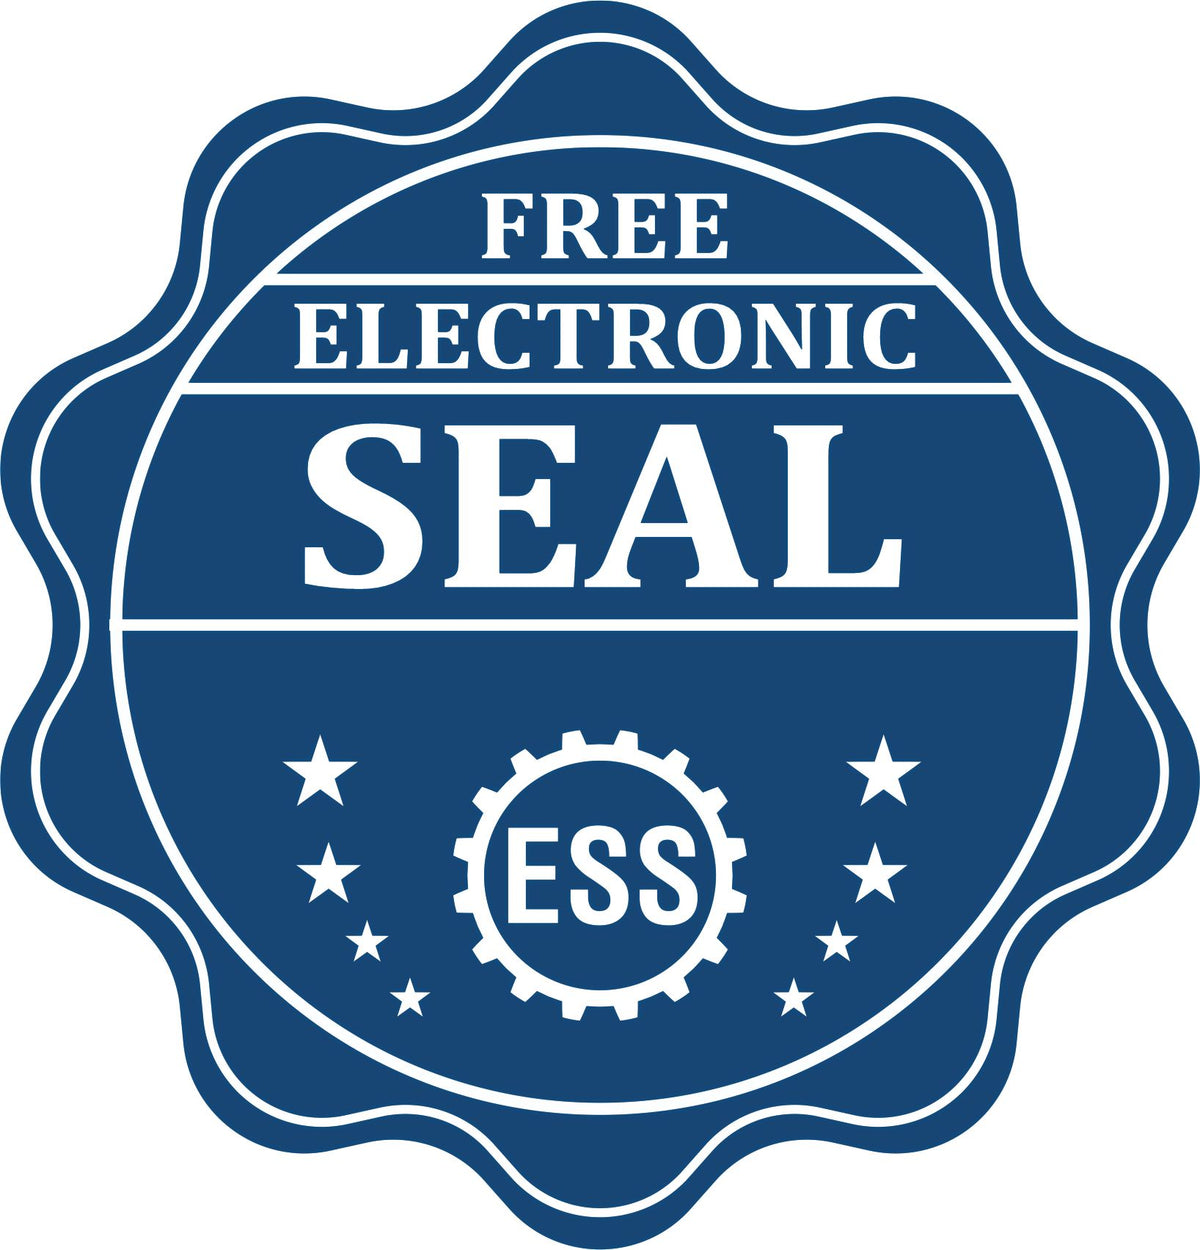 A badge showing a free electronic seal for the Hybrid Connecticut Architect Seal with stars and the ESS gear on the emblem.